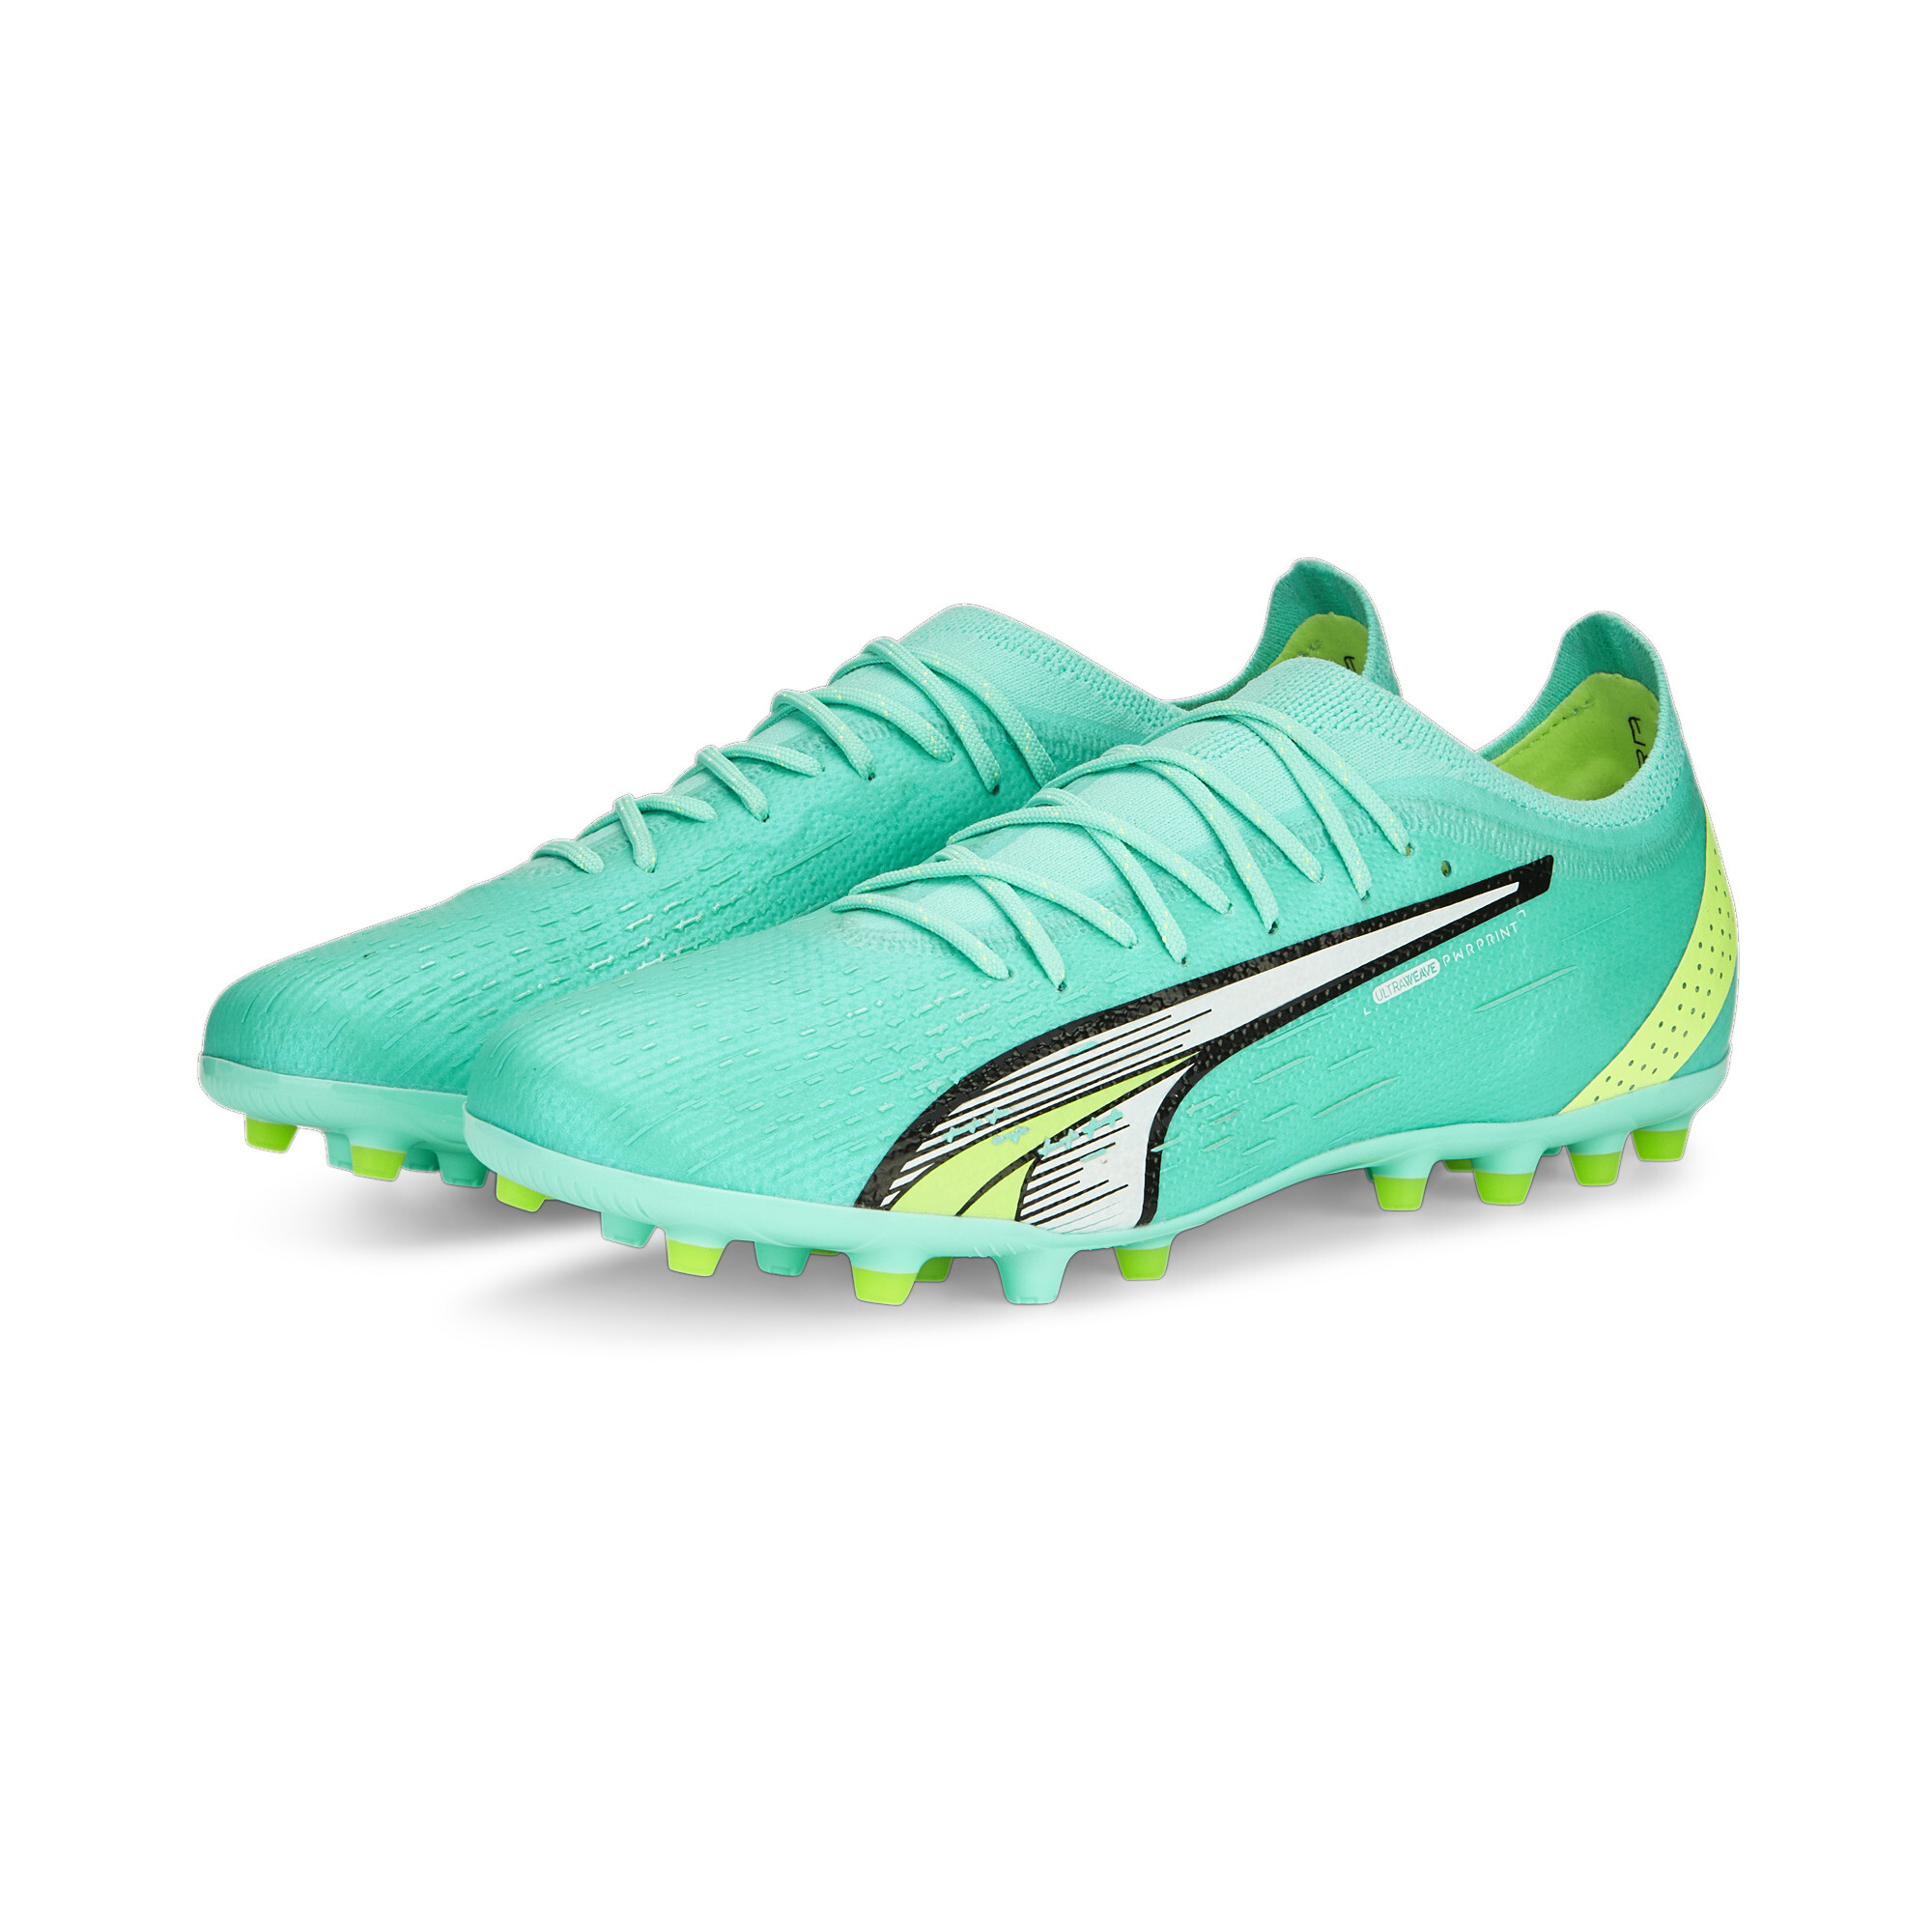 Men's Puma ULTRA ULTIMATE MG Football Cleats, Green, Size 40, Shoes